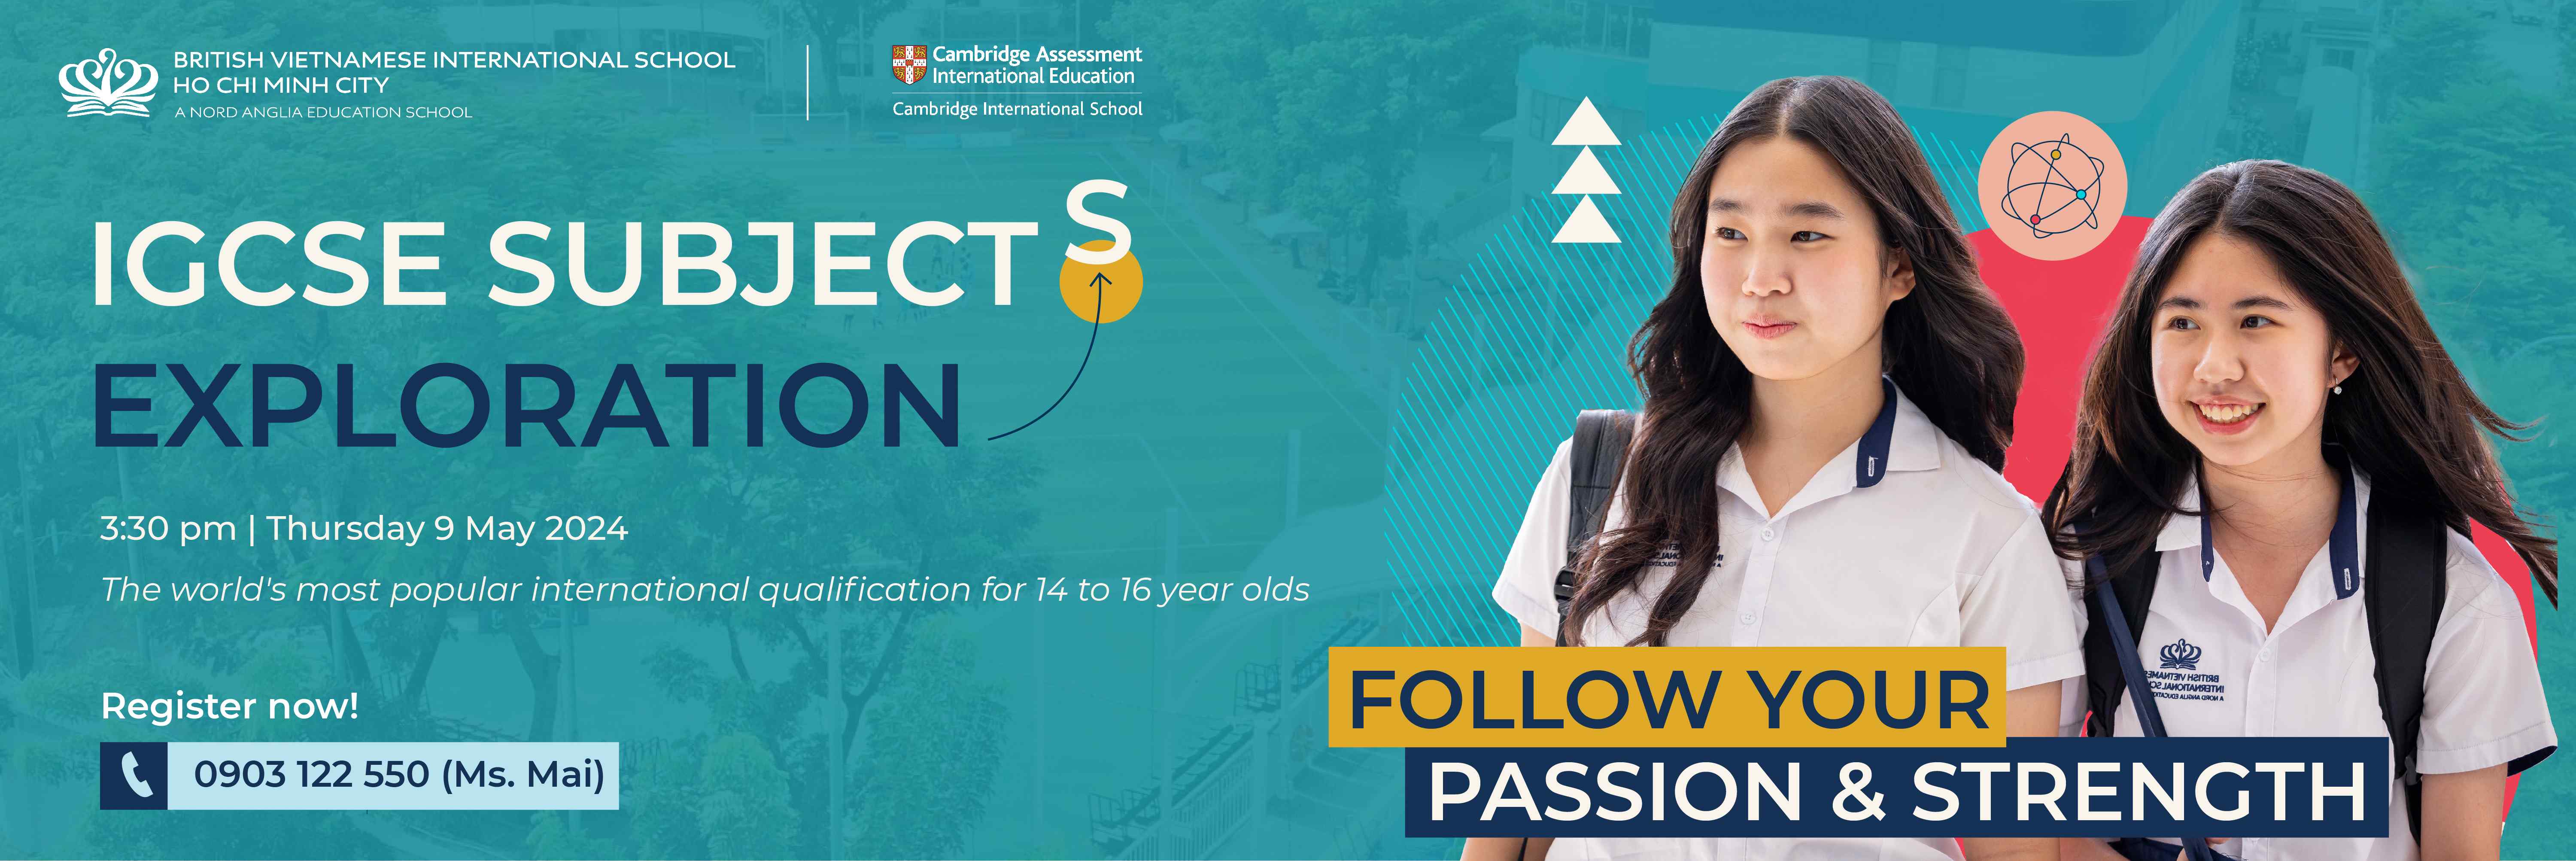 Local Campaign | BVIS HCMC| Nord Anglia - Content Page Header - IGCSE Subjects Exploration